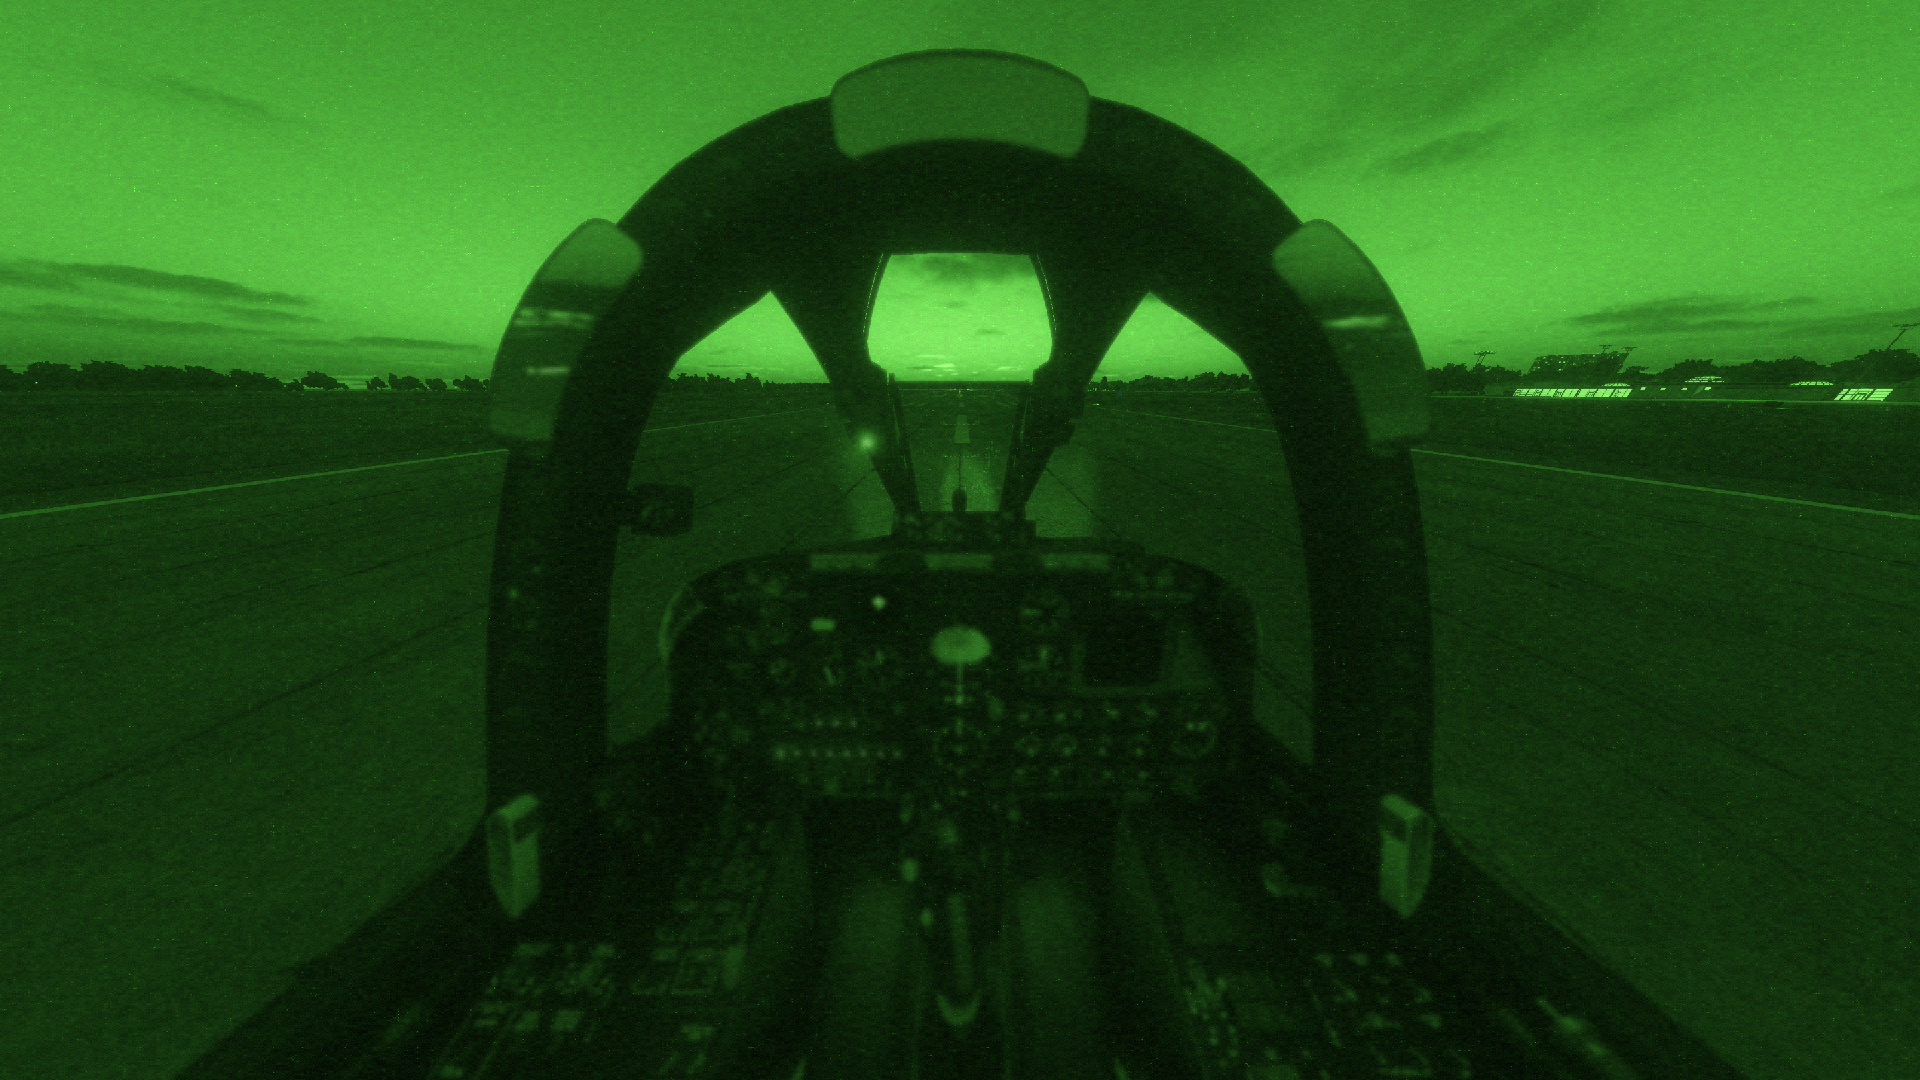 Night vision helmets luminosity inputs for FC3 (NVG is not working on 2.8 and above)